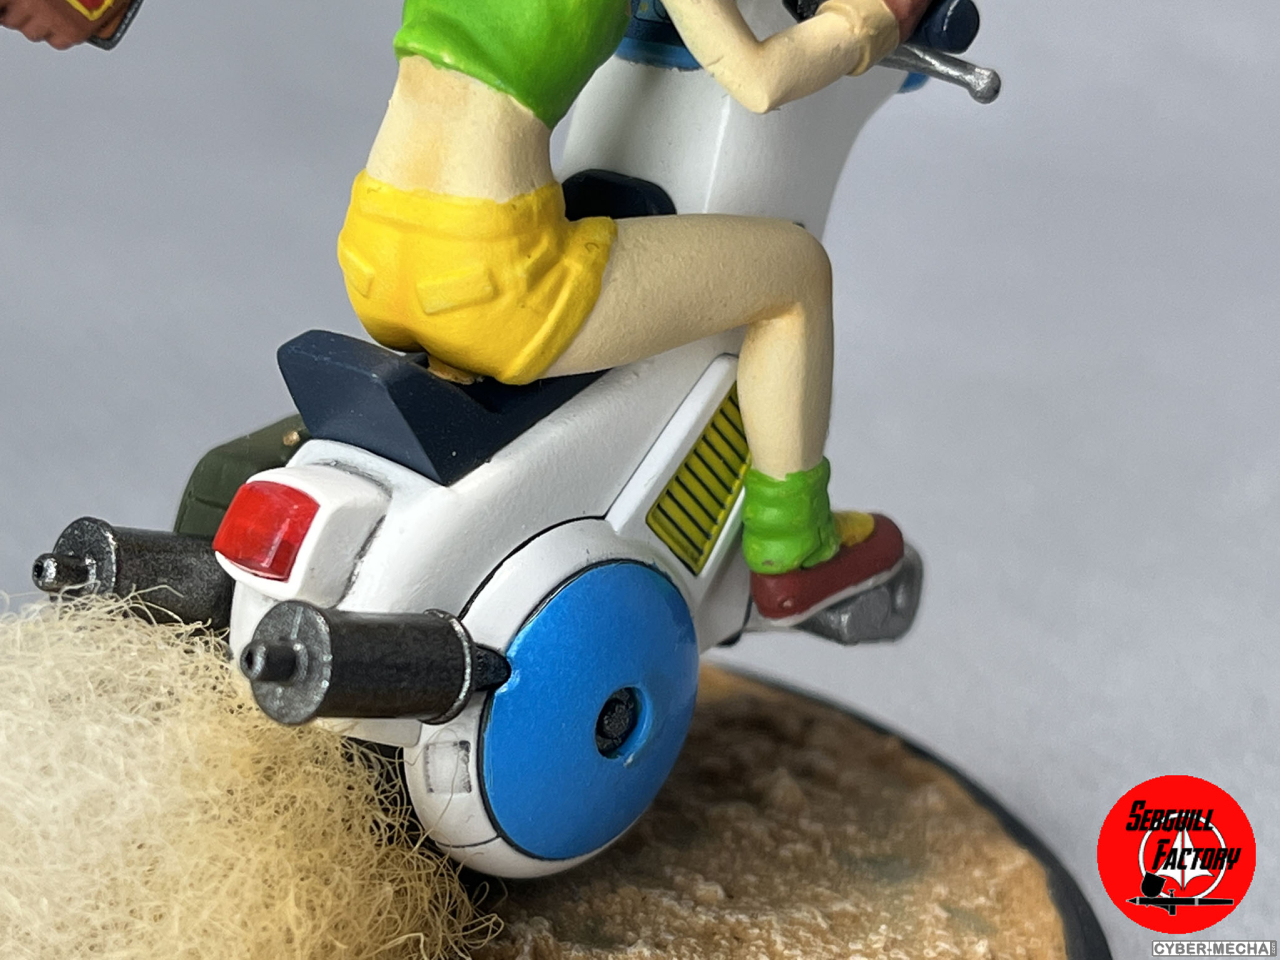 Dragon ball mecha collection 3 Lunch’s one wheel motorcycle 1678634513